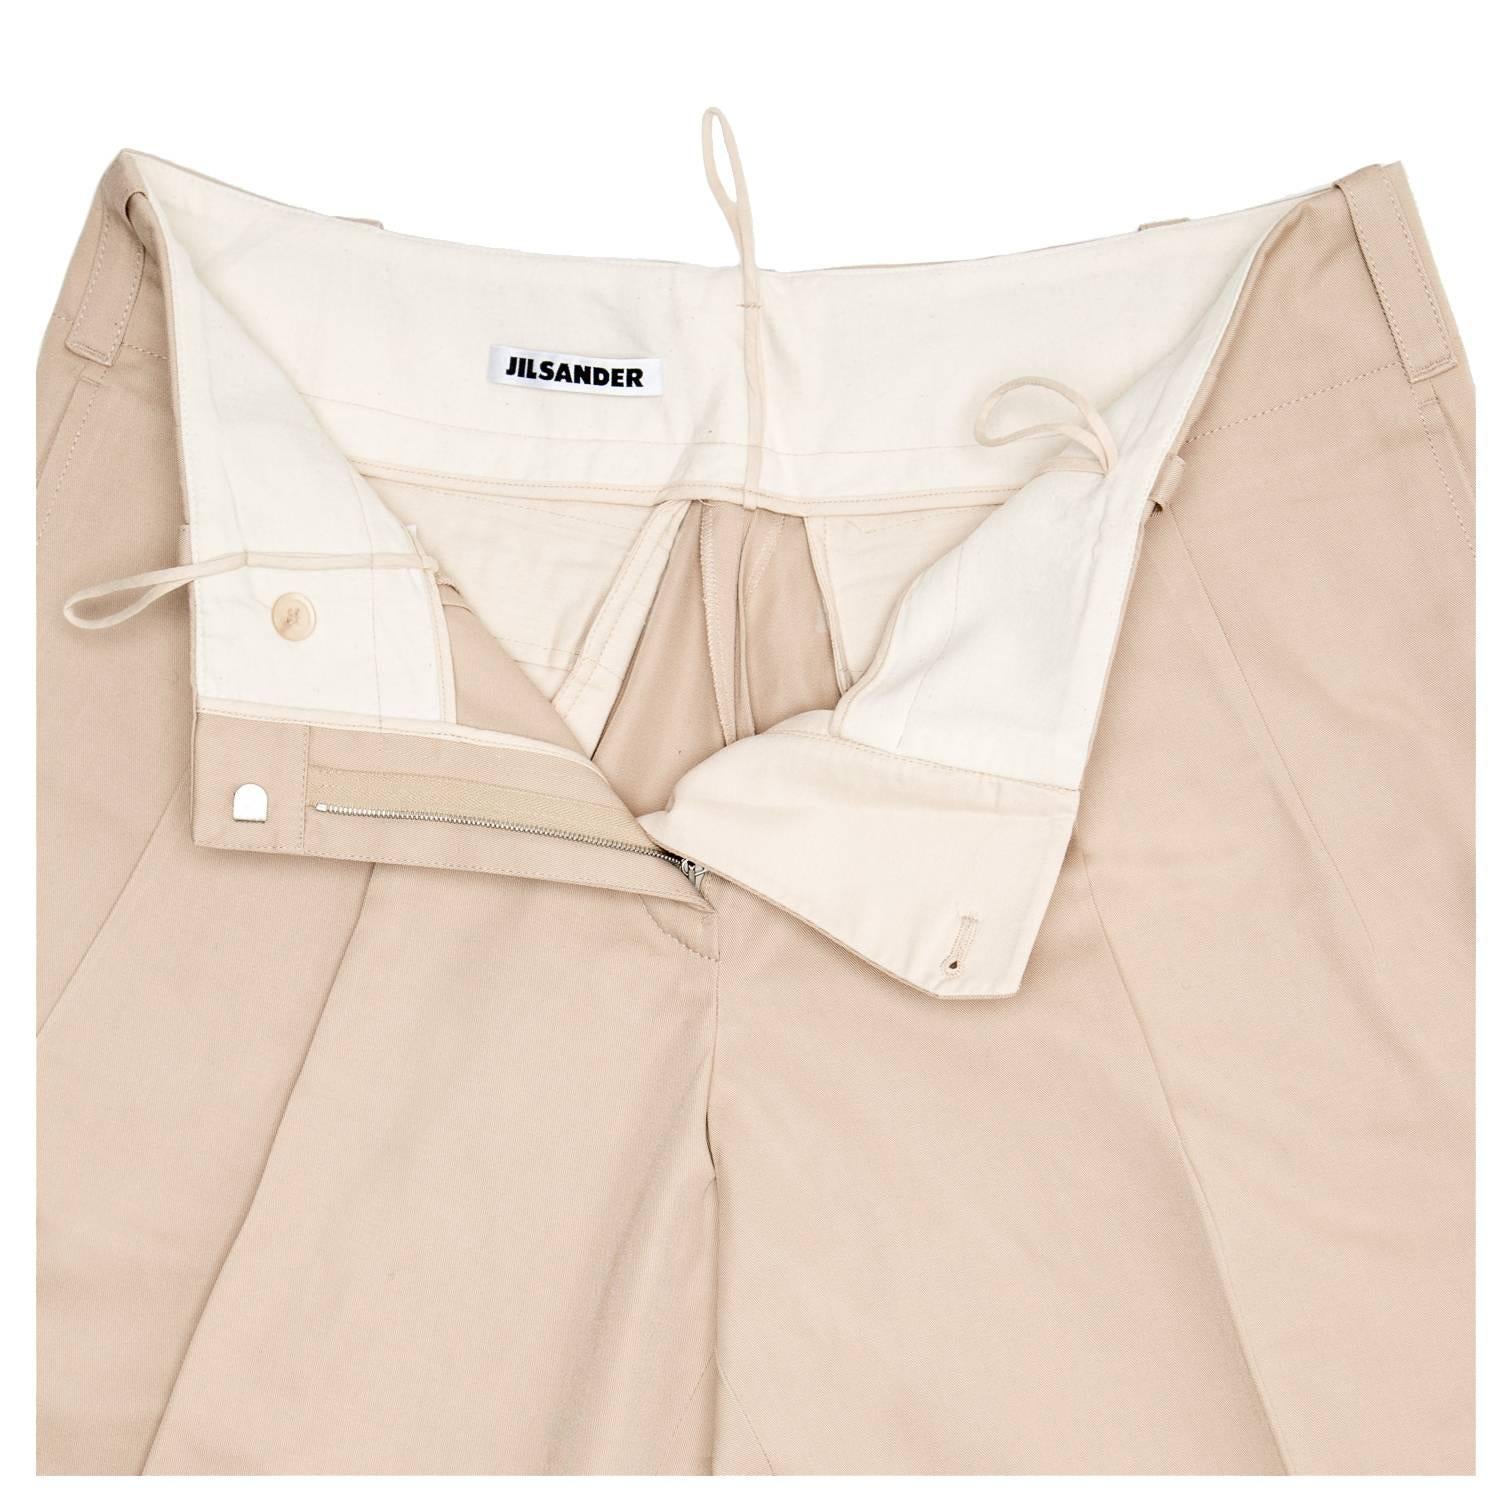 Jil Sander Khaki Heavy Cotton Pants In New Condition For Sale In Brooklyn, NY